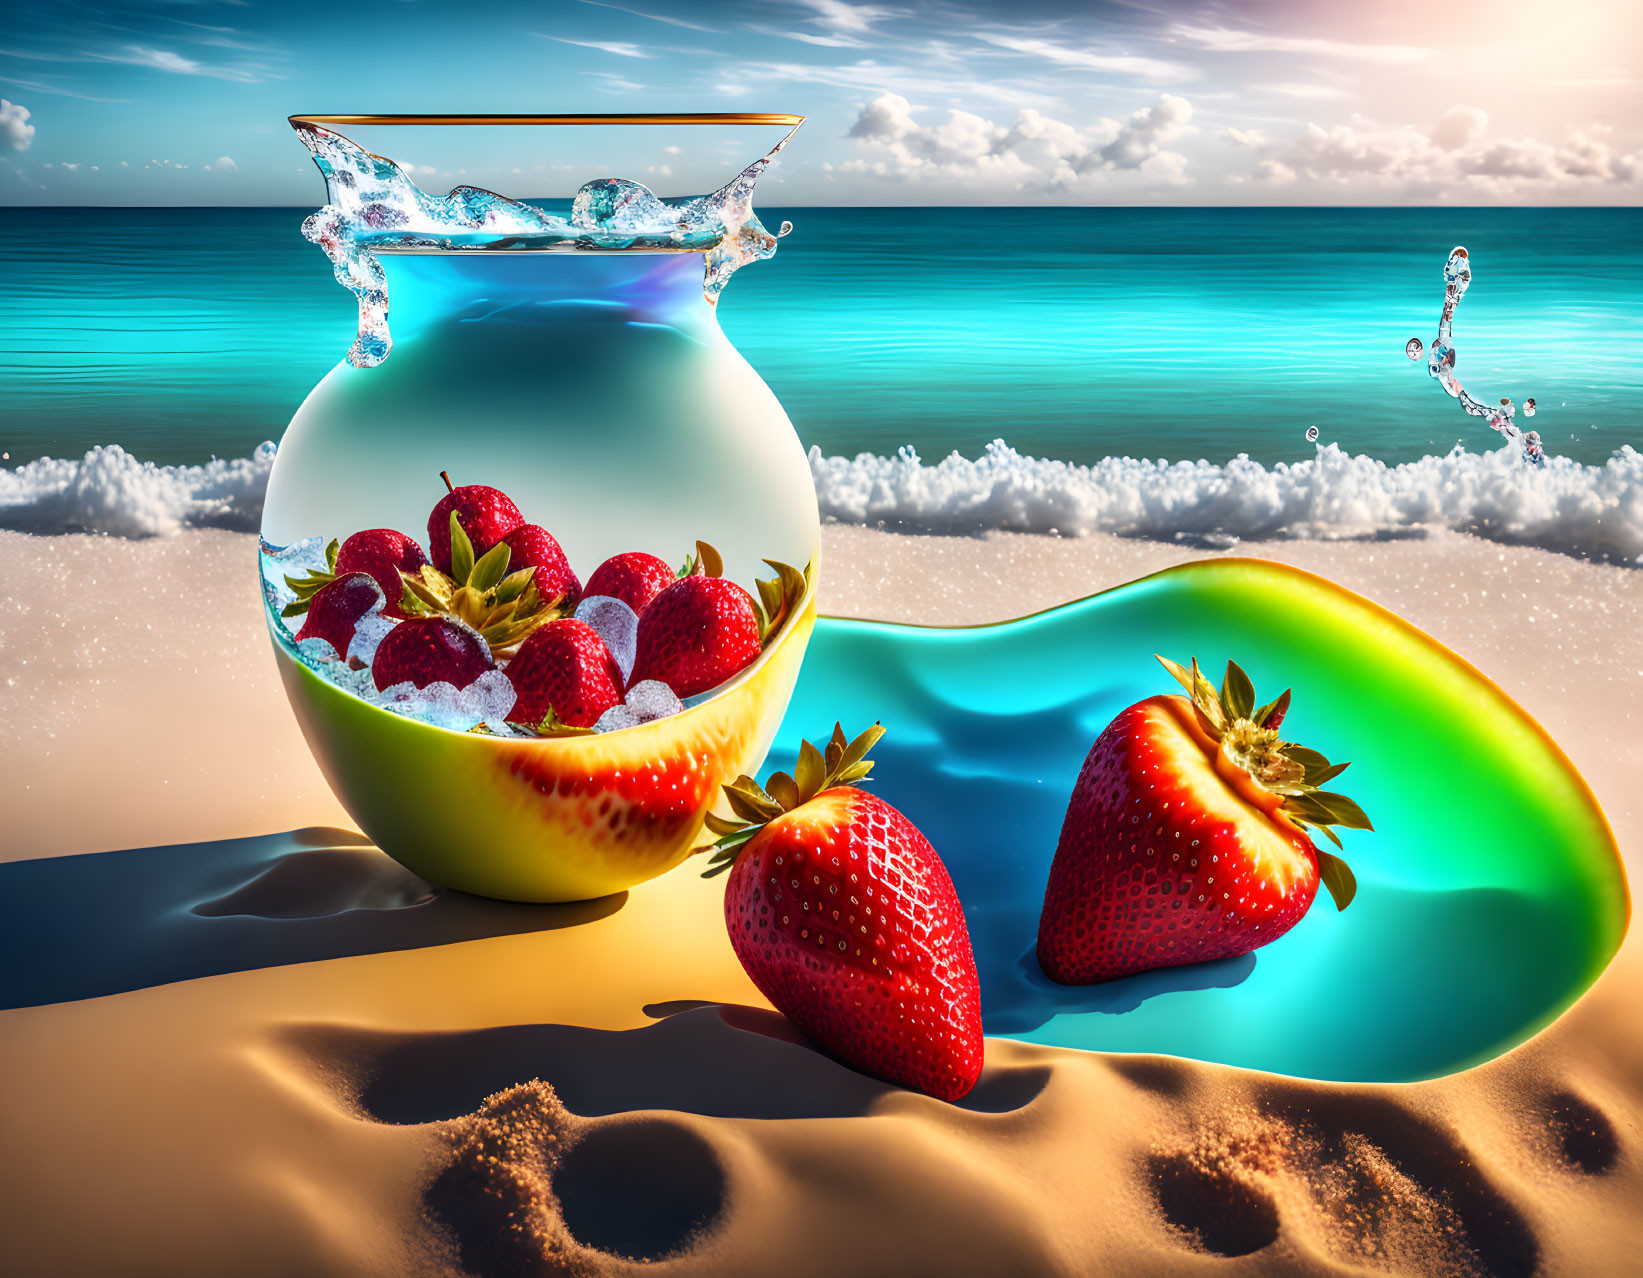 Surreal image of transparent fishbowl with strawberries on beach